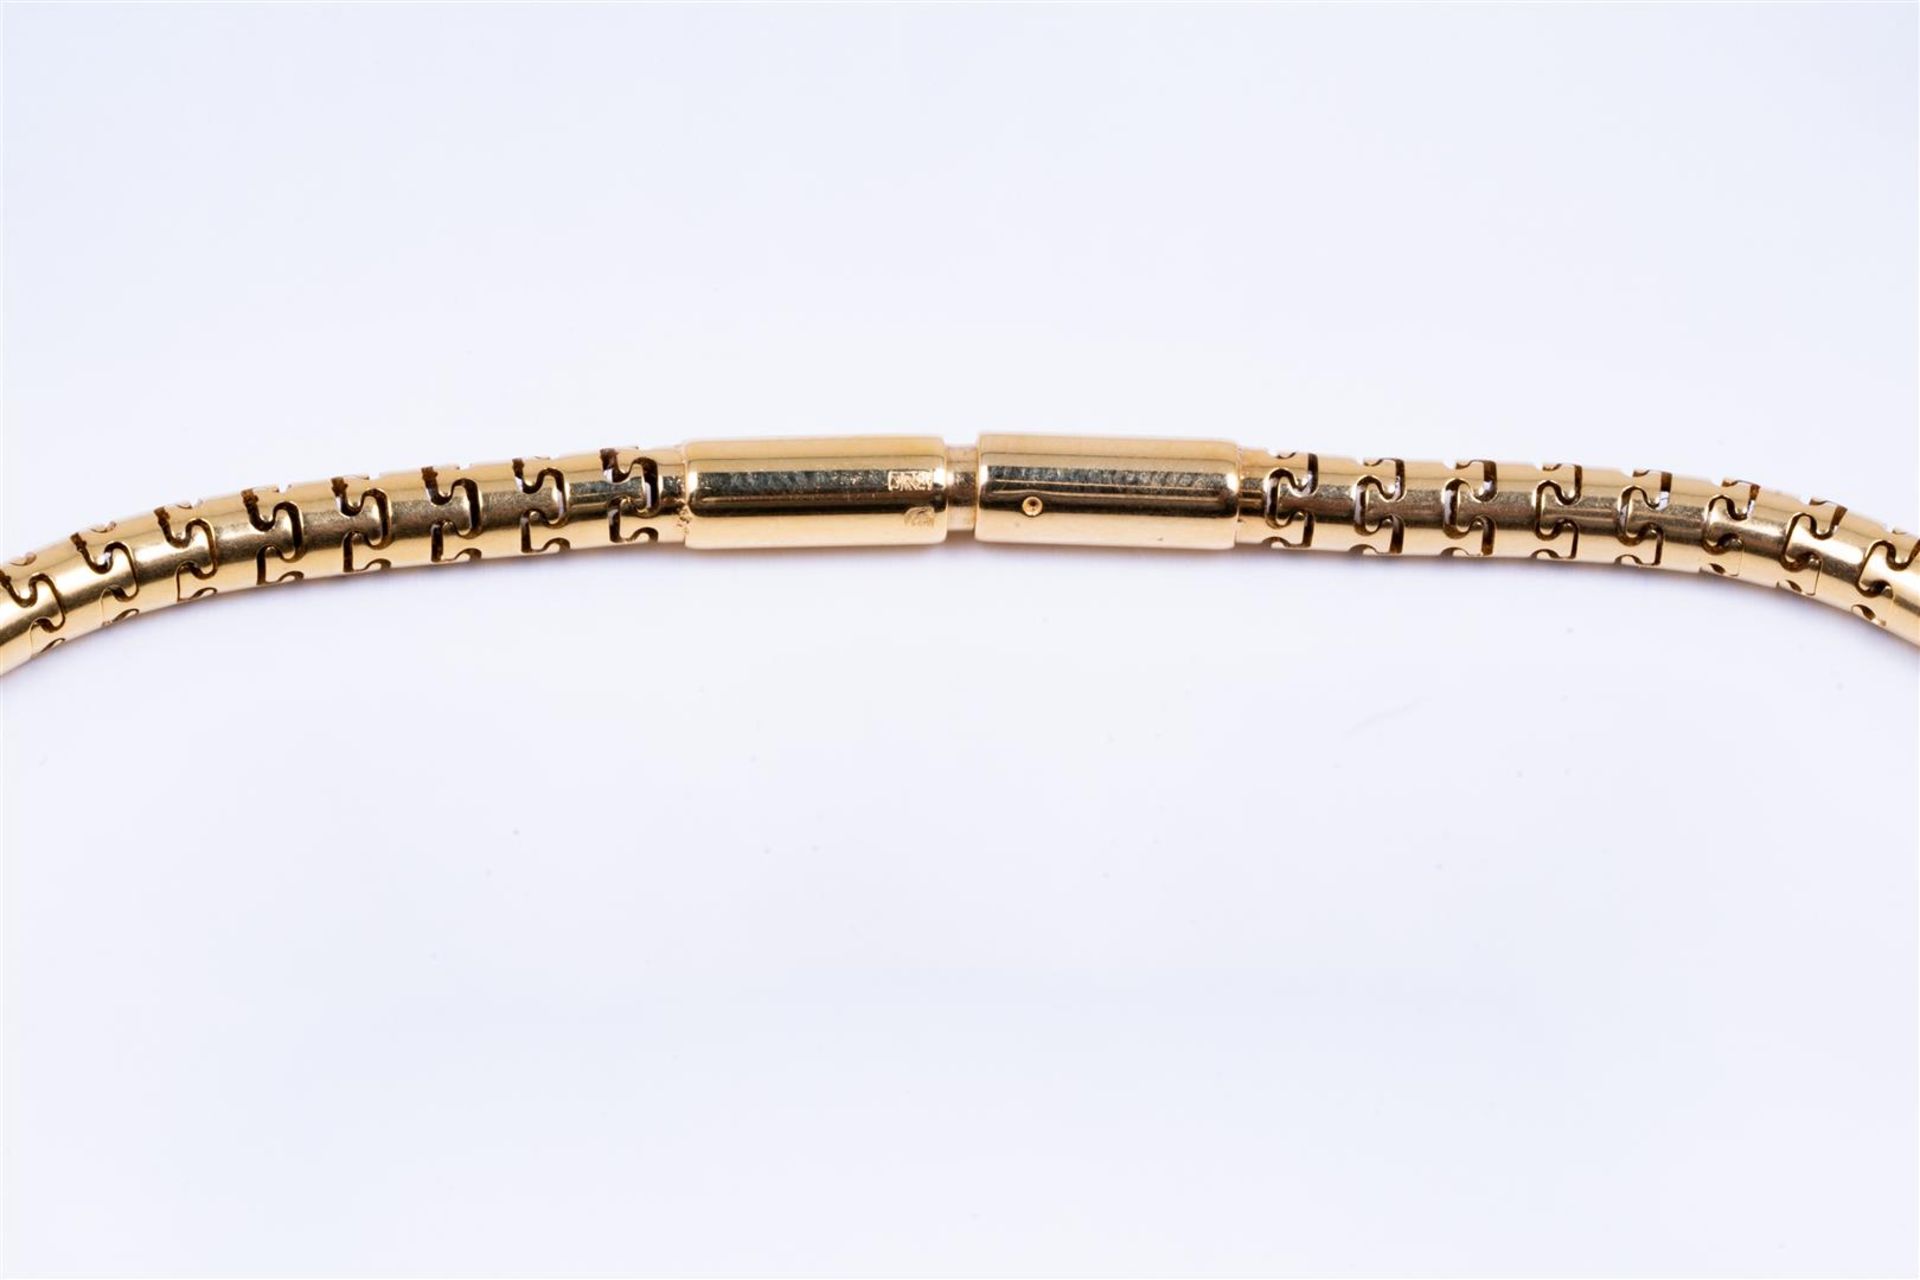 18kt snake necklace "Le Chic" with unique puzzle link.
The necklace has a bayonet clasp and beautifu - Image 2 of 2